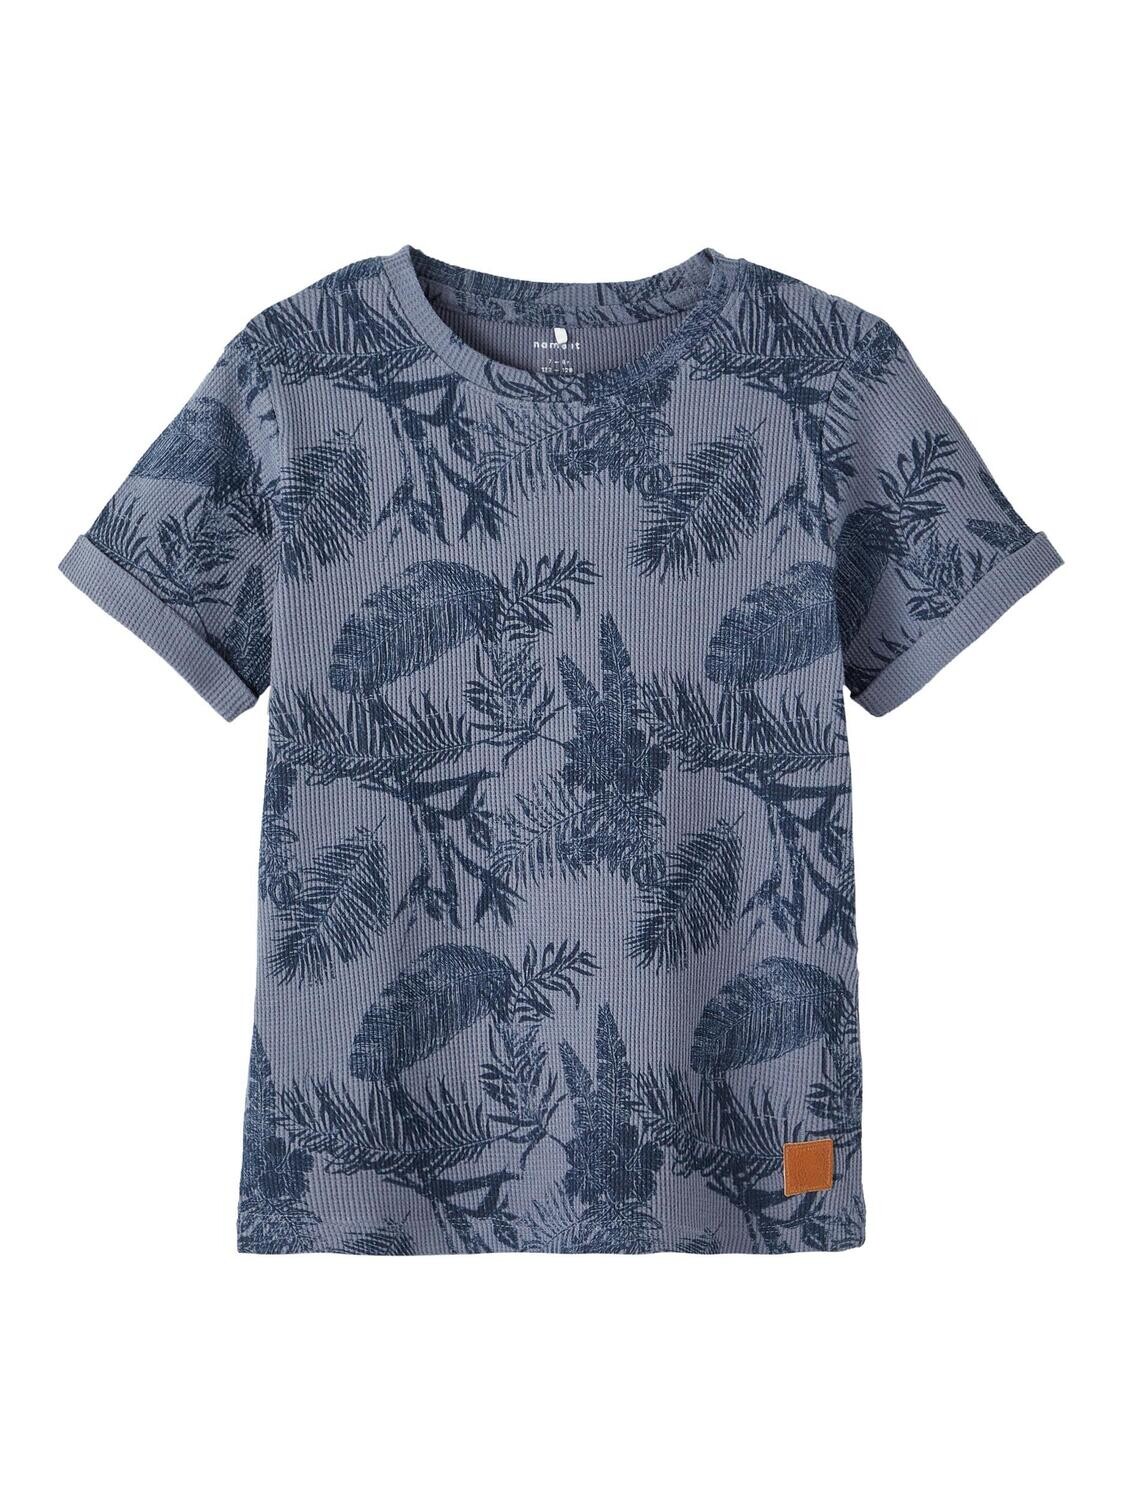 KIDS t-shirt - HOMADS - jeansblauw/leaves